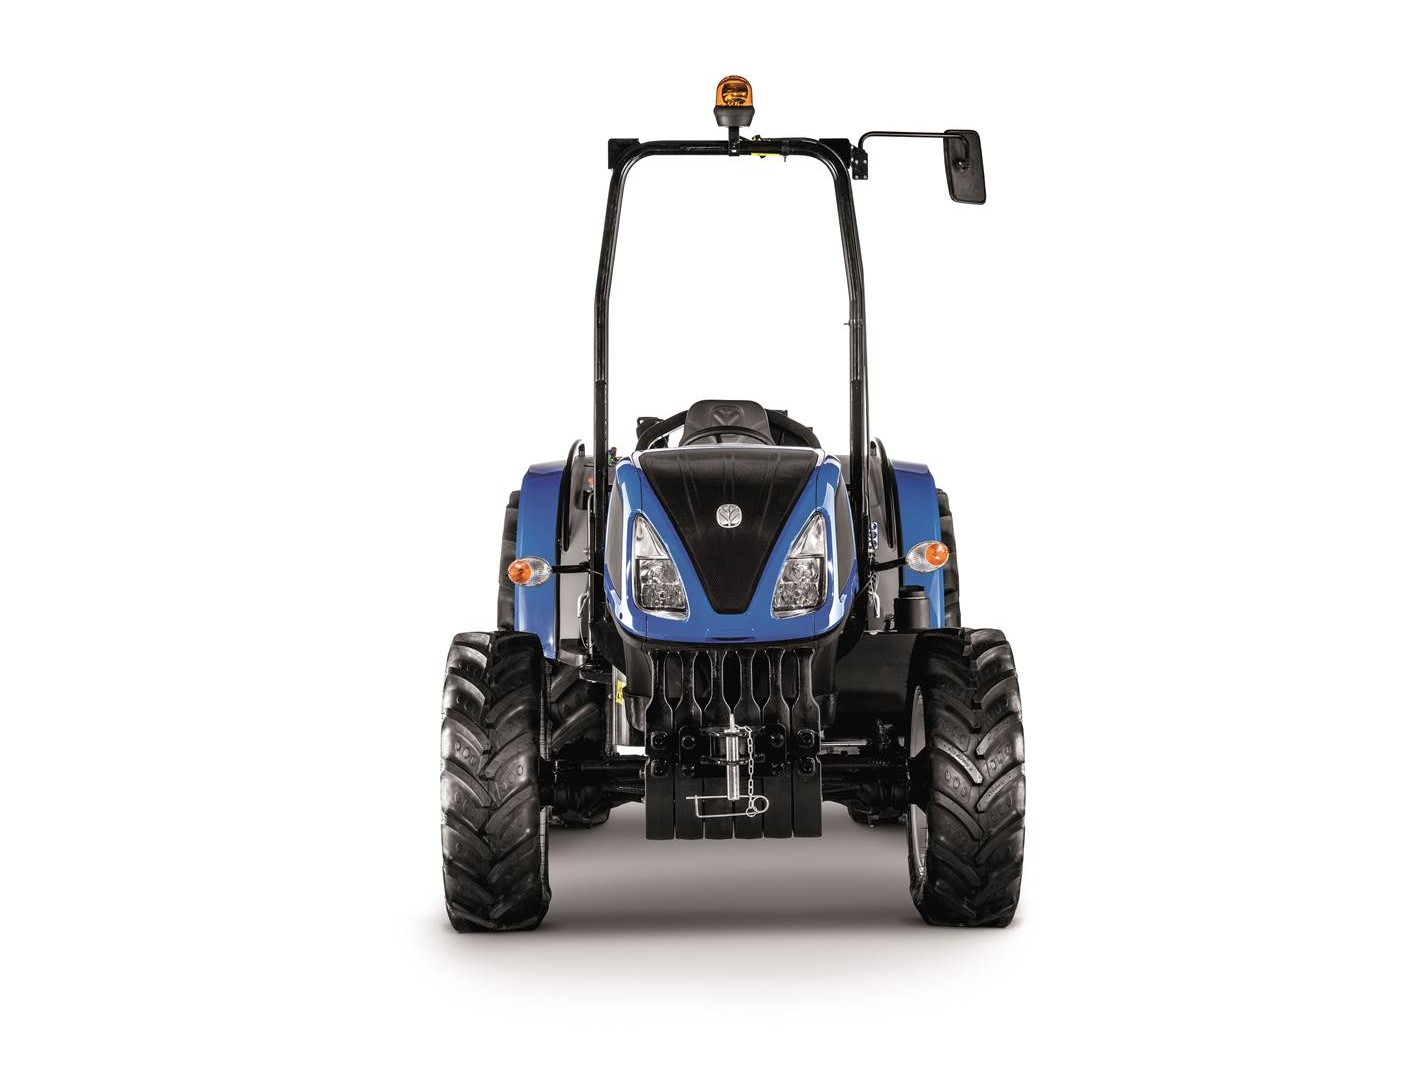 New Holland TD4F Series delivers more performance with emissions compliance